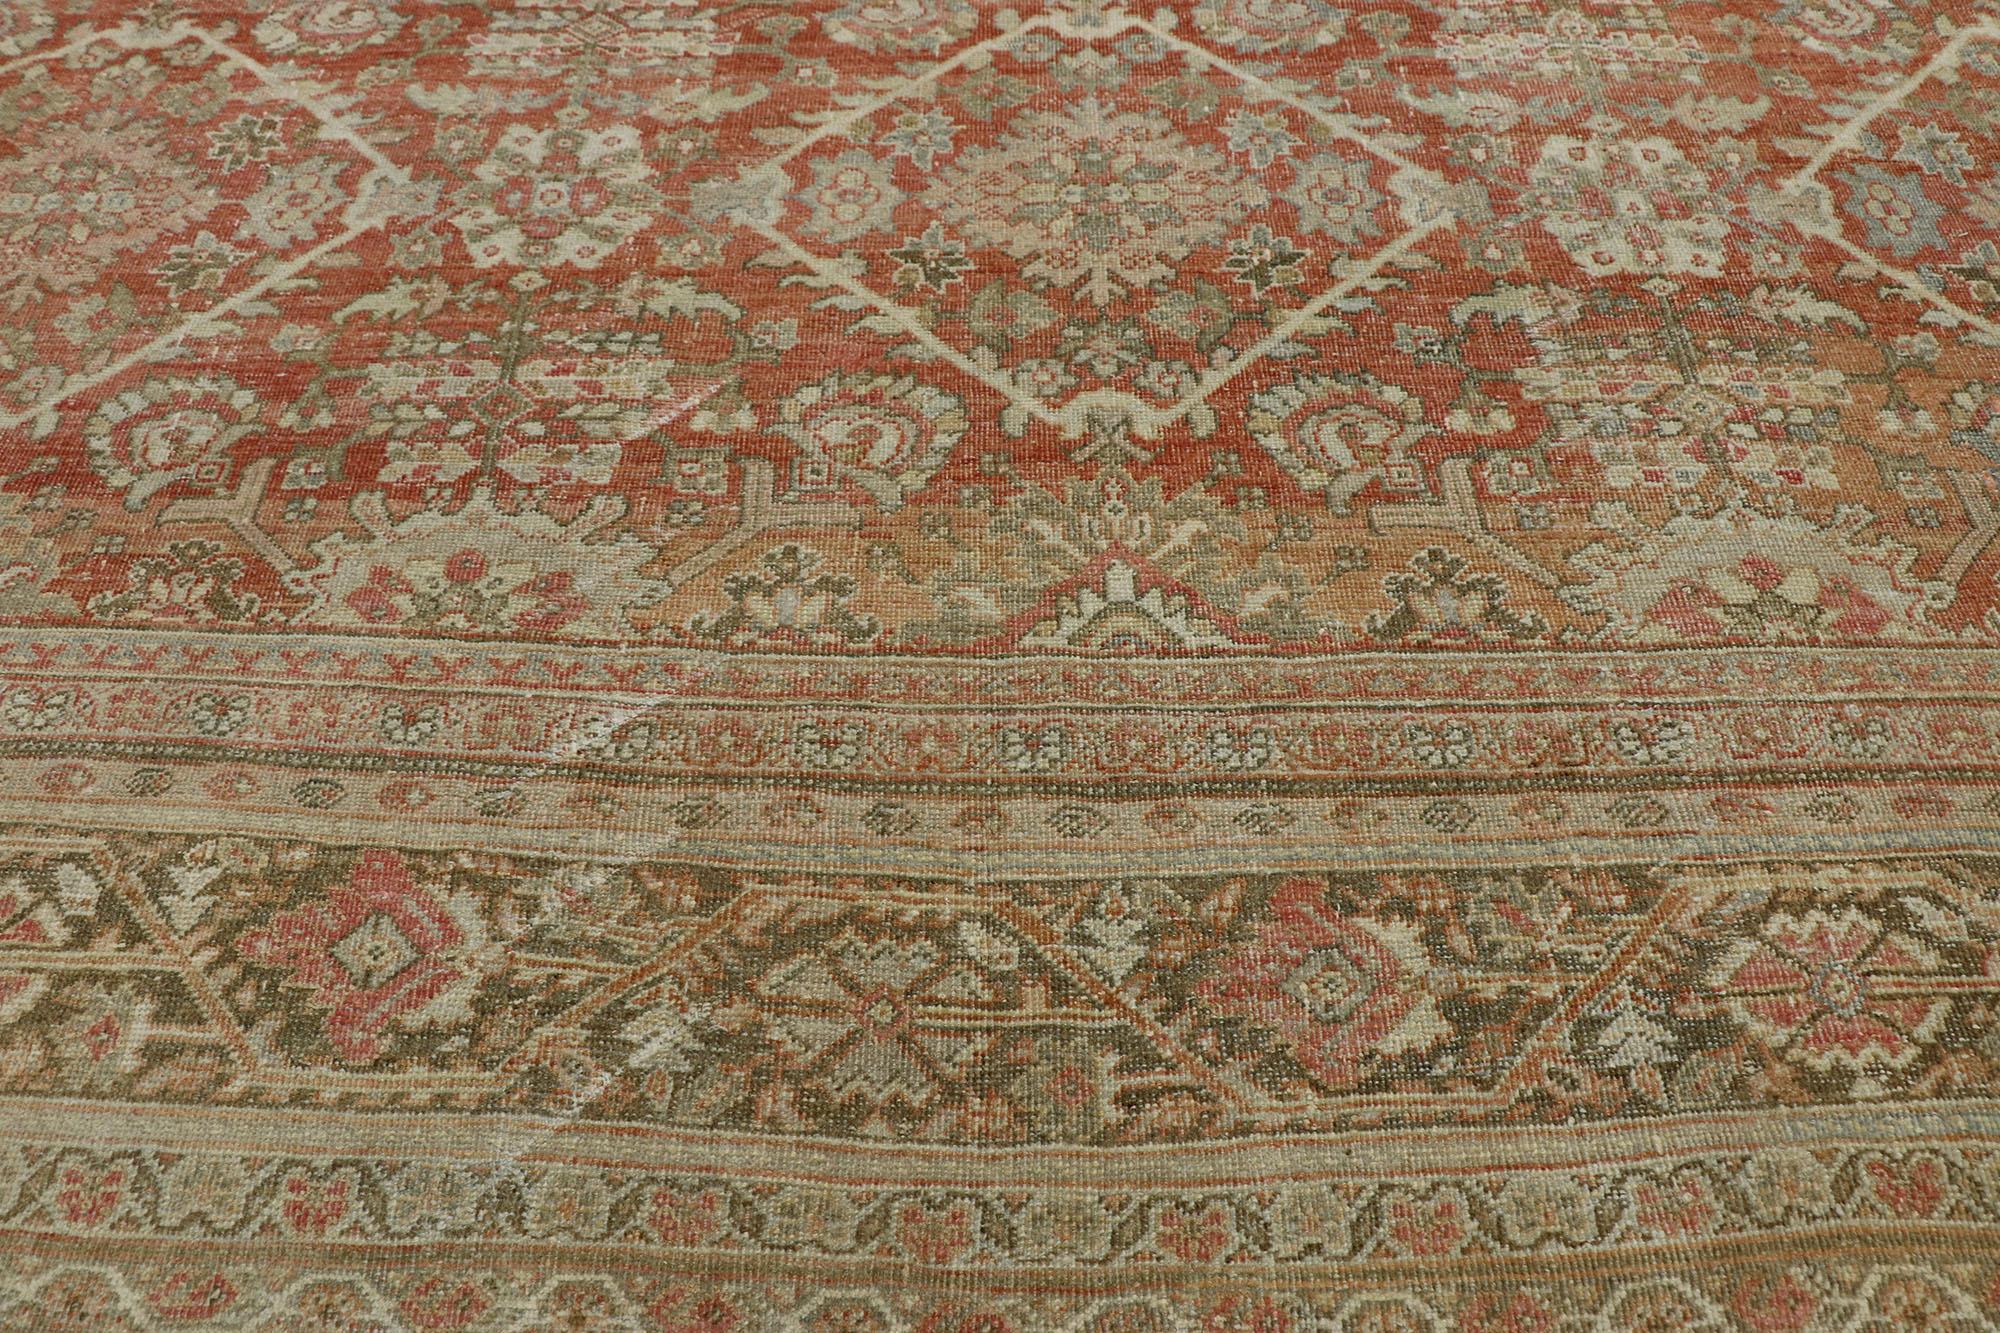 20th Century Distressed Antique Persian Mahal Rug with Rustic Spanish Mission Style